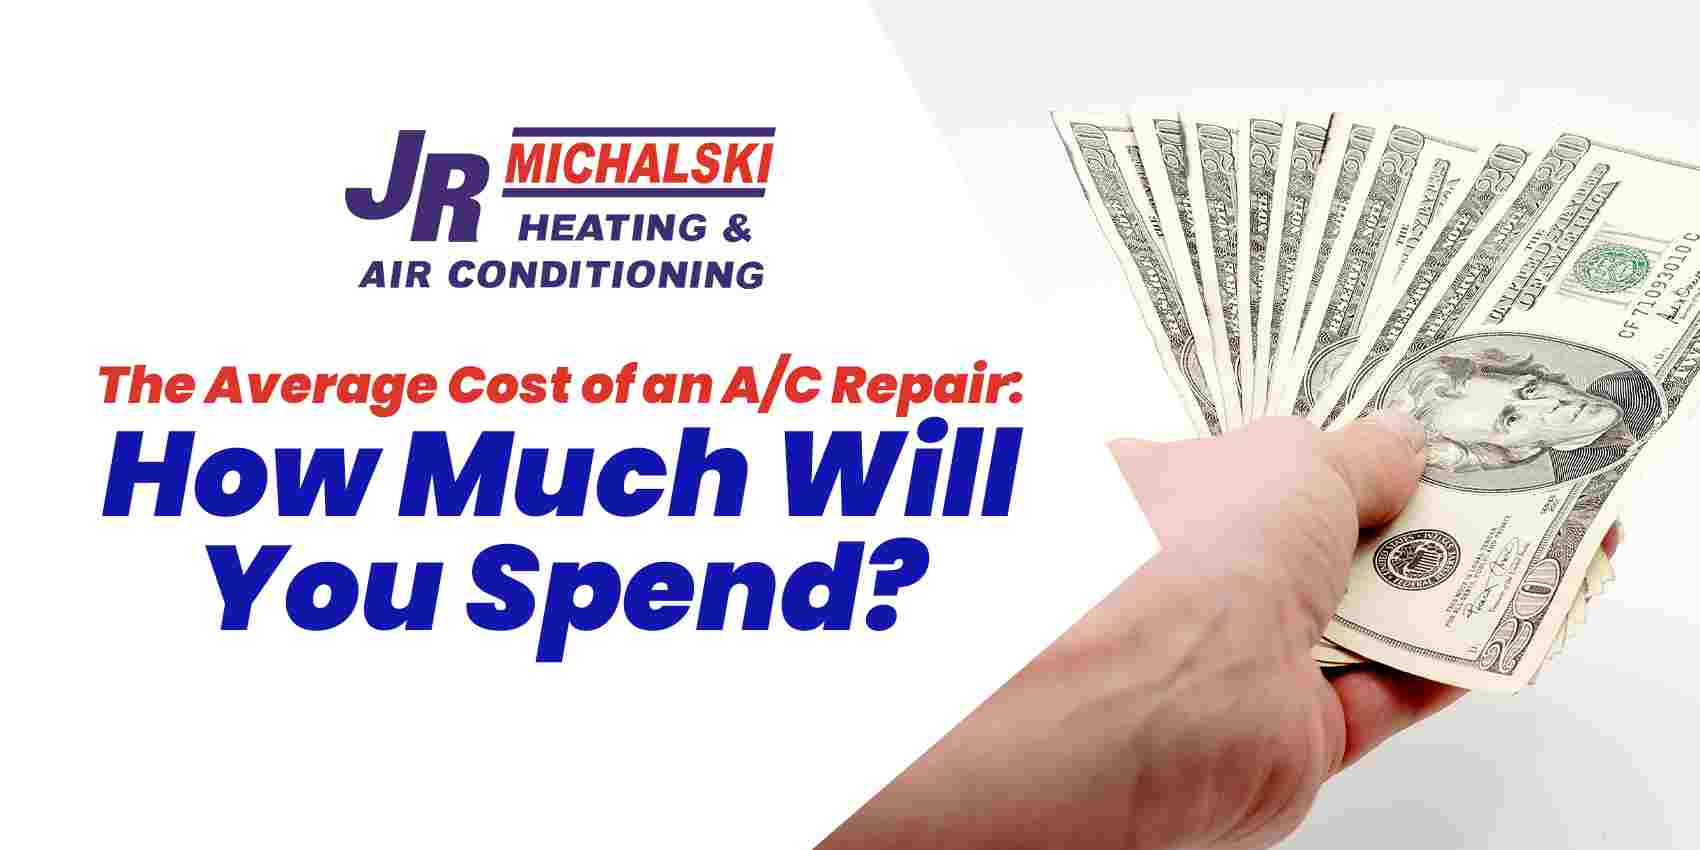 The Average Cost of an A/C Repair: How Much Will You Spend?